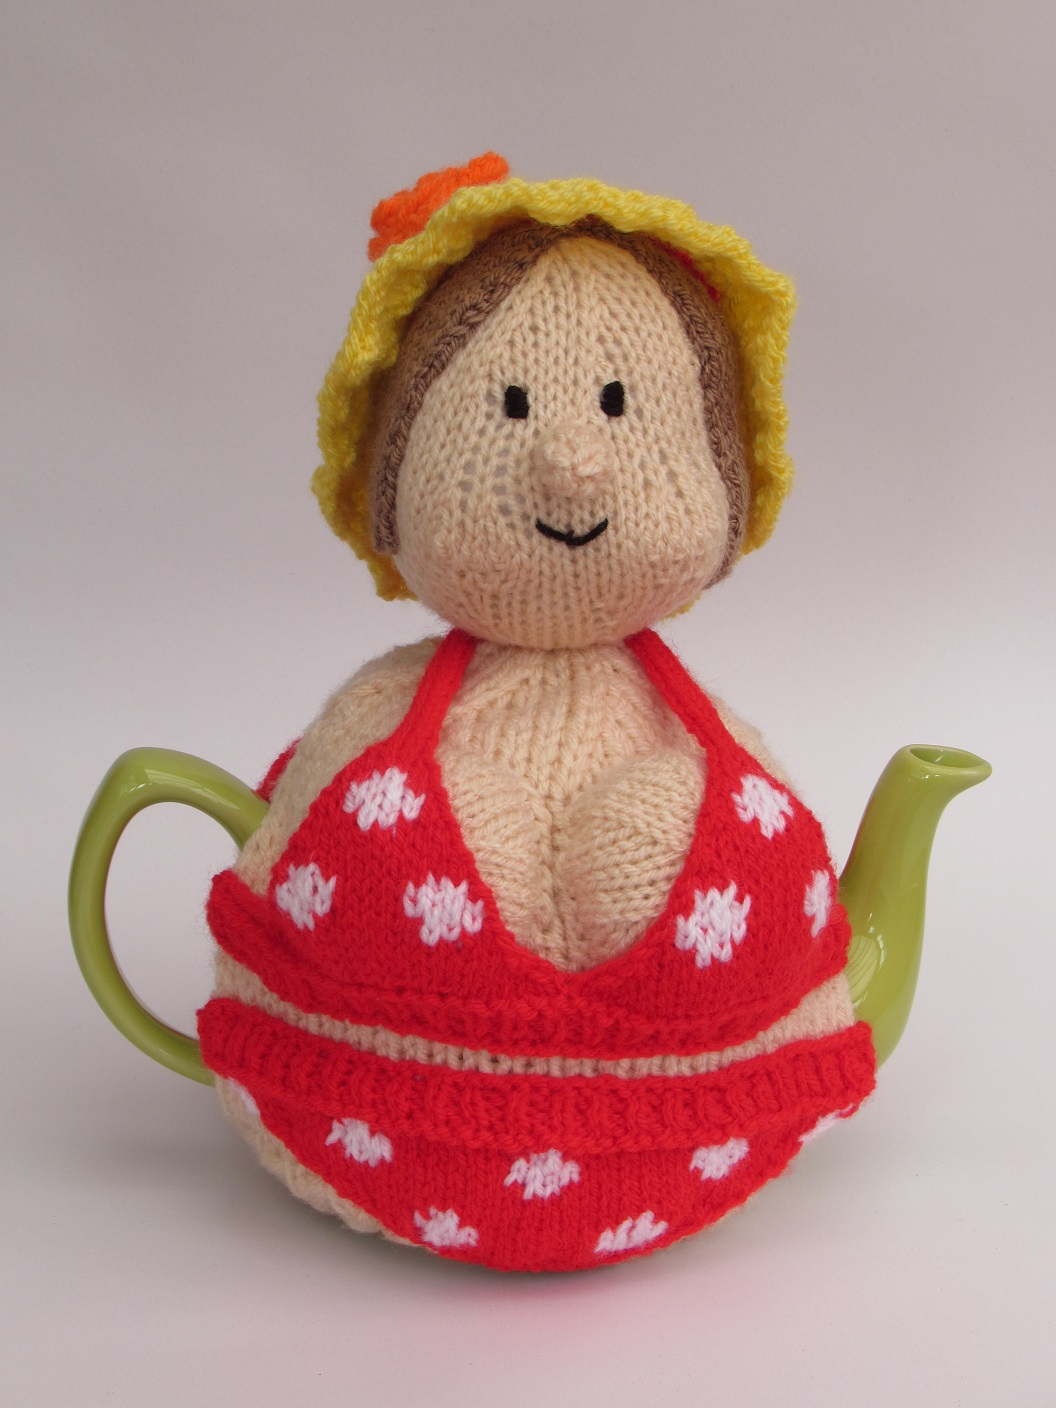 Tea Cozy Patterns To Knit Tea Cosy Knitting Patterns From Tea Cosy Folk Learn How To Knit Our